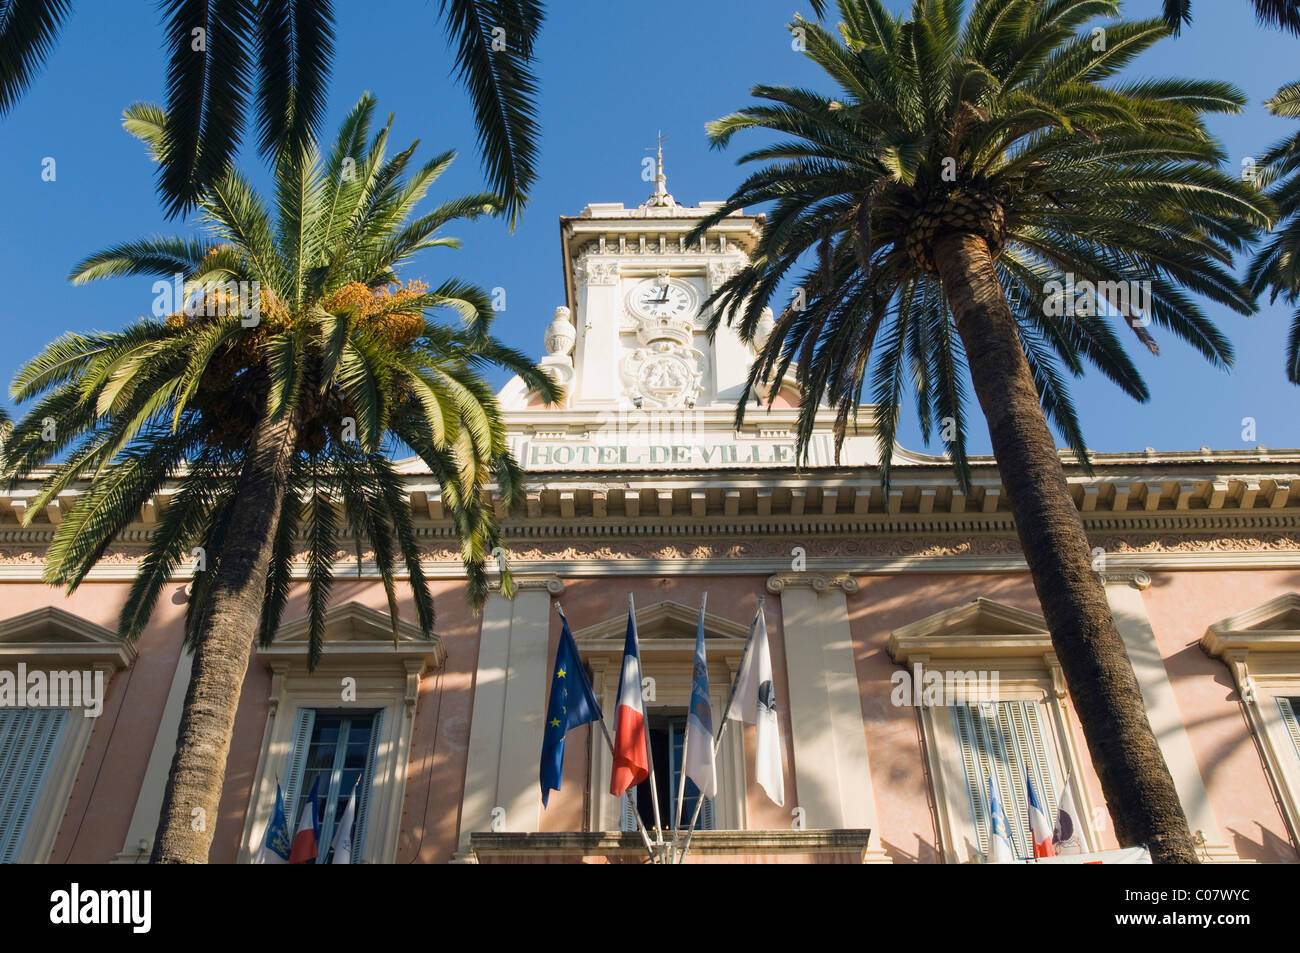 Palm trees outside the town hall, Place Marechal Foch, Ajaccio, Corsica, France, Europe Stock Photo